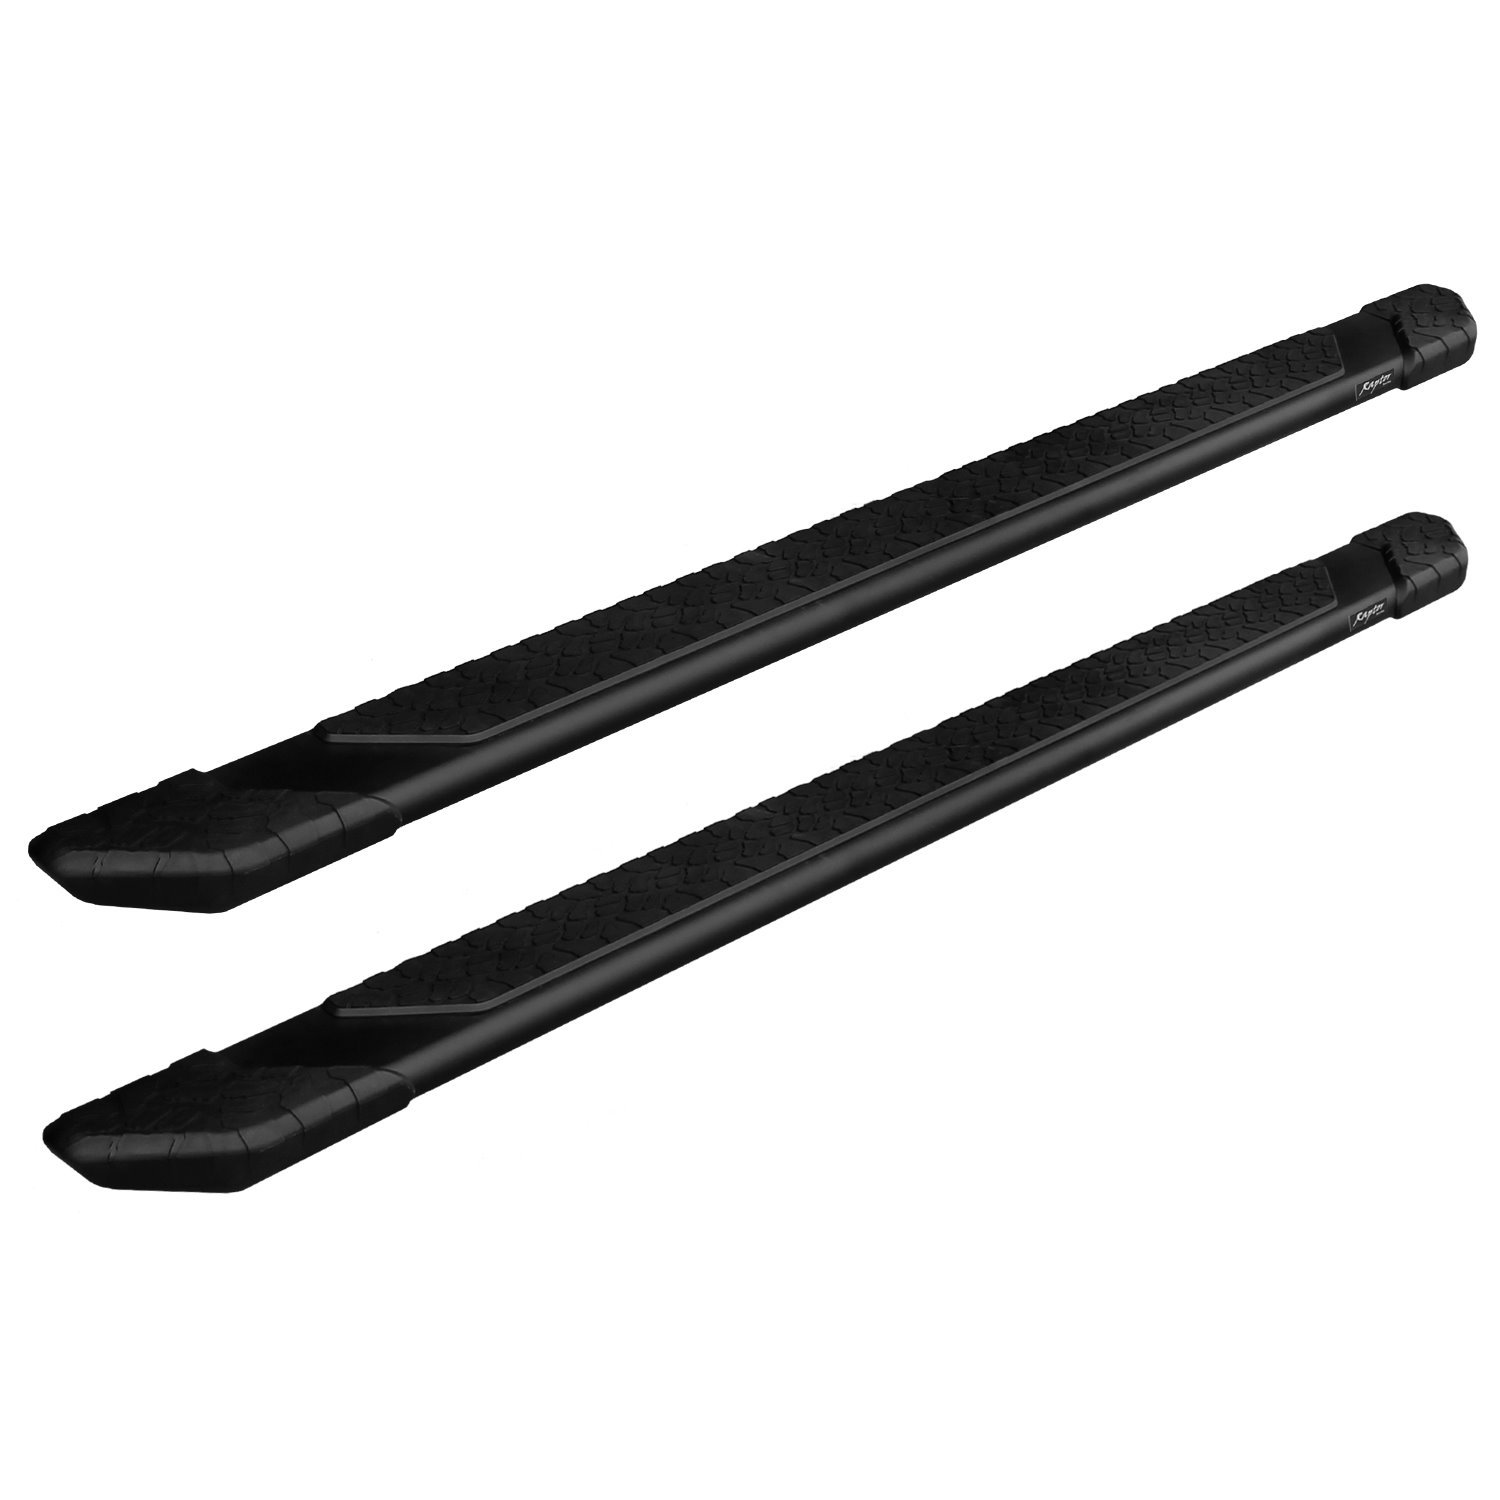 1901-0342BT 5 in Tread Step Slide Track Running Boards, Black Aluminum, Fits Select Chevy Colorado/GMC Canyon